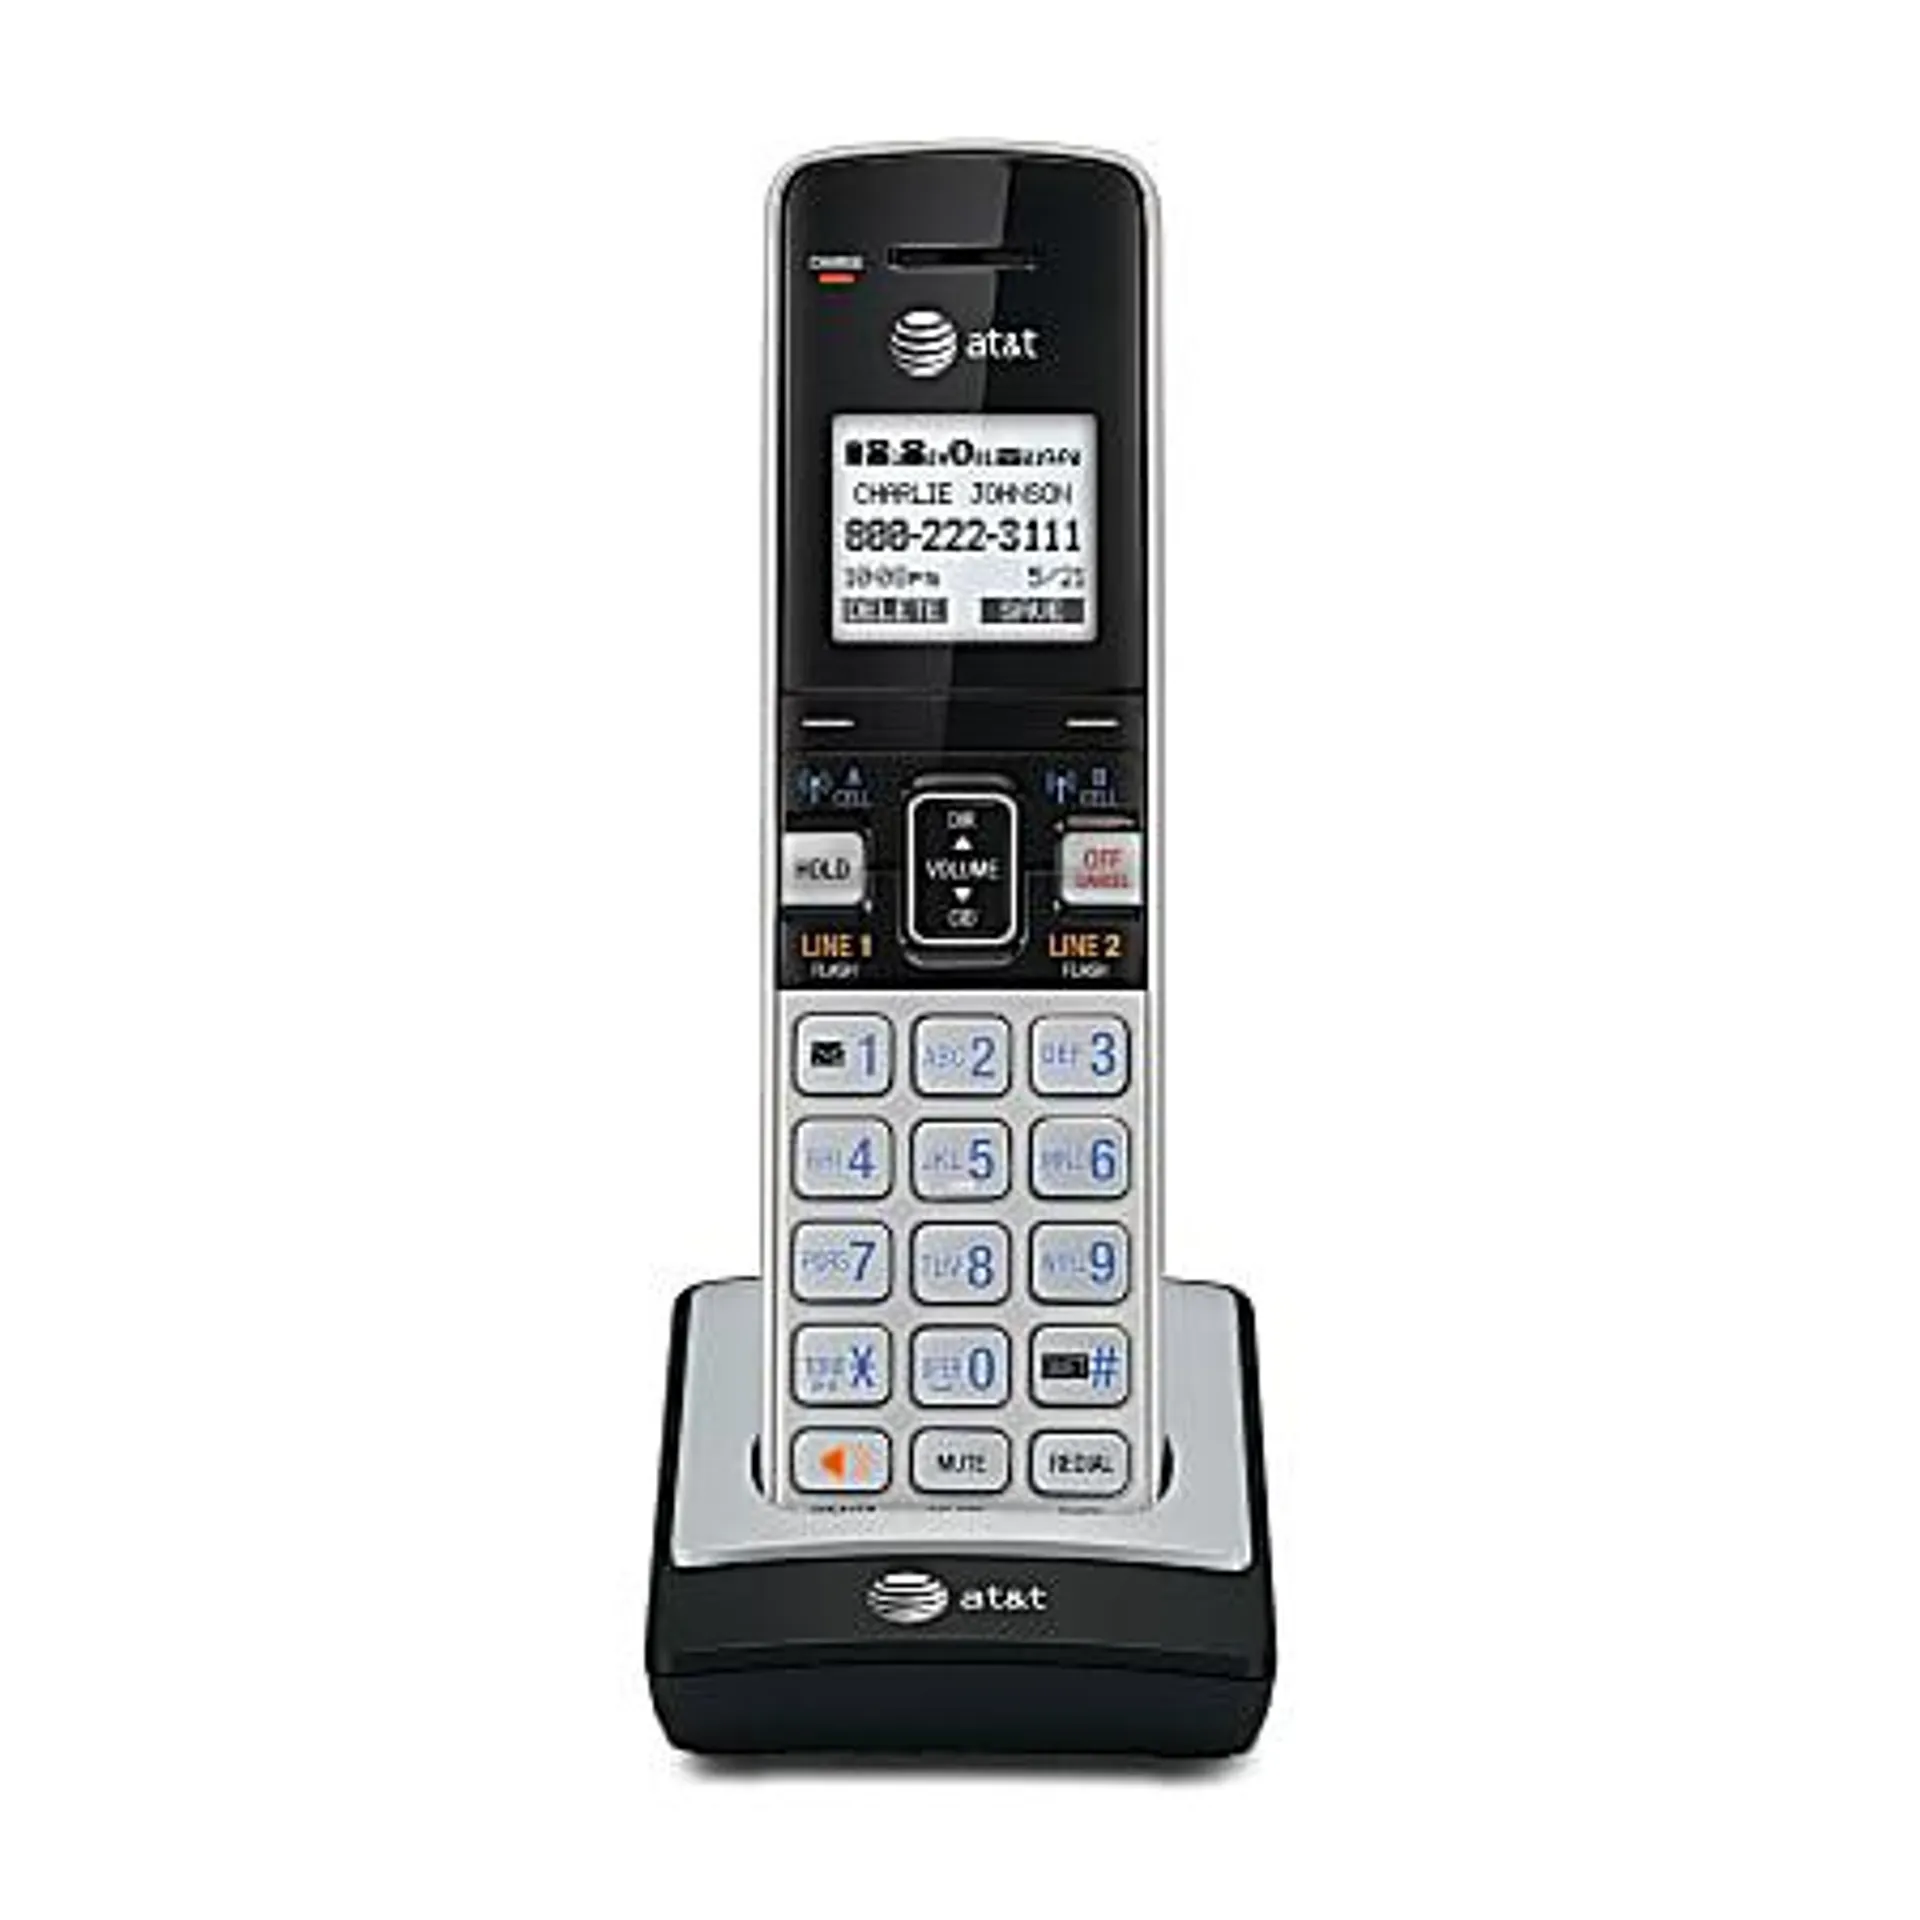 AT&T TL86003 DECT 6.0 Expansion Cordless Handset For AT&T TL86103 Expandable Phone System